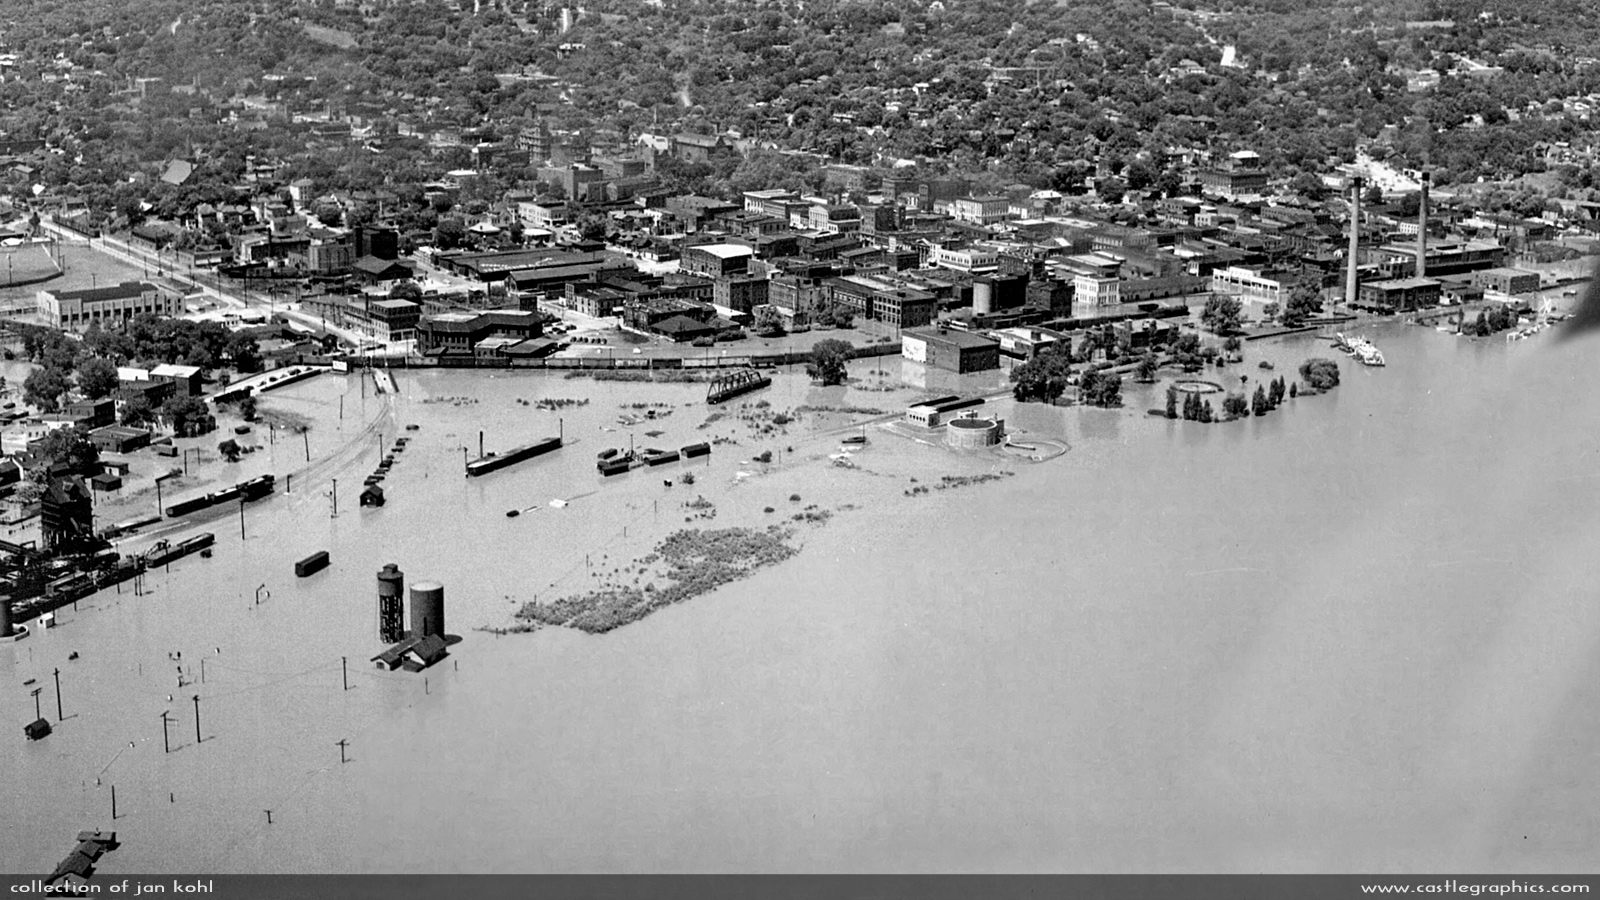 Aerial shot of Hannibal flooding
Photo from an aircraft of the Mississippi flooding of Hannibal in 1946.  Most of the CB&Q yard is completely under water (left and lower left) while the rest of the town fairs a little better.
